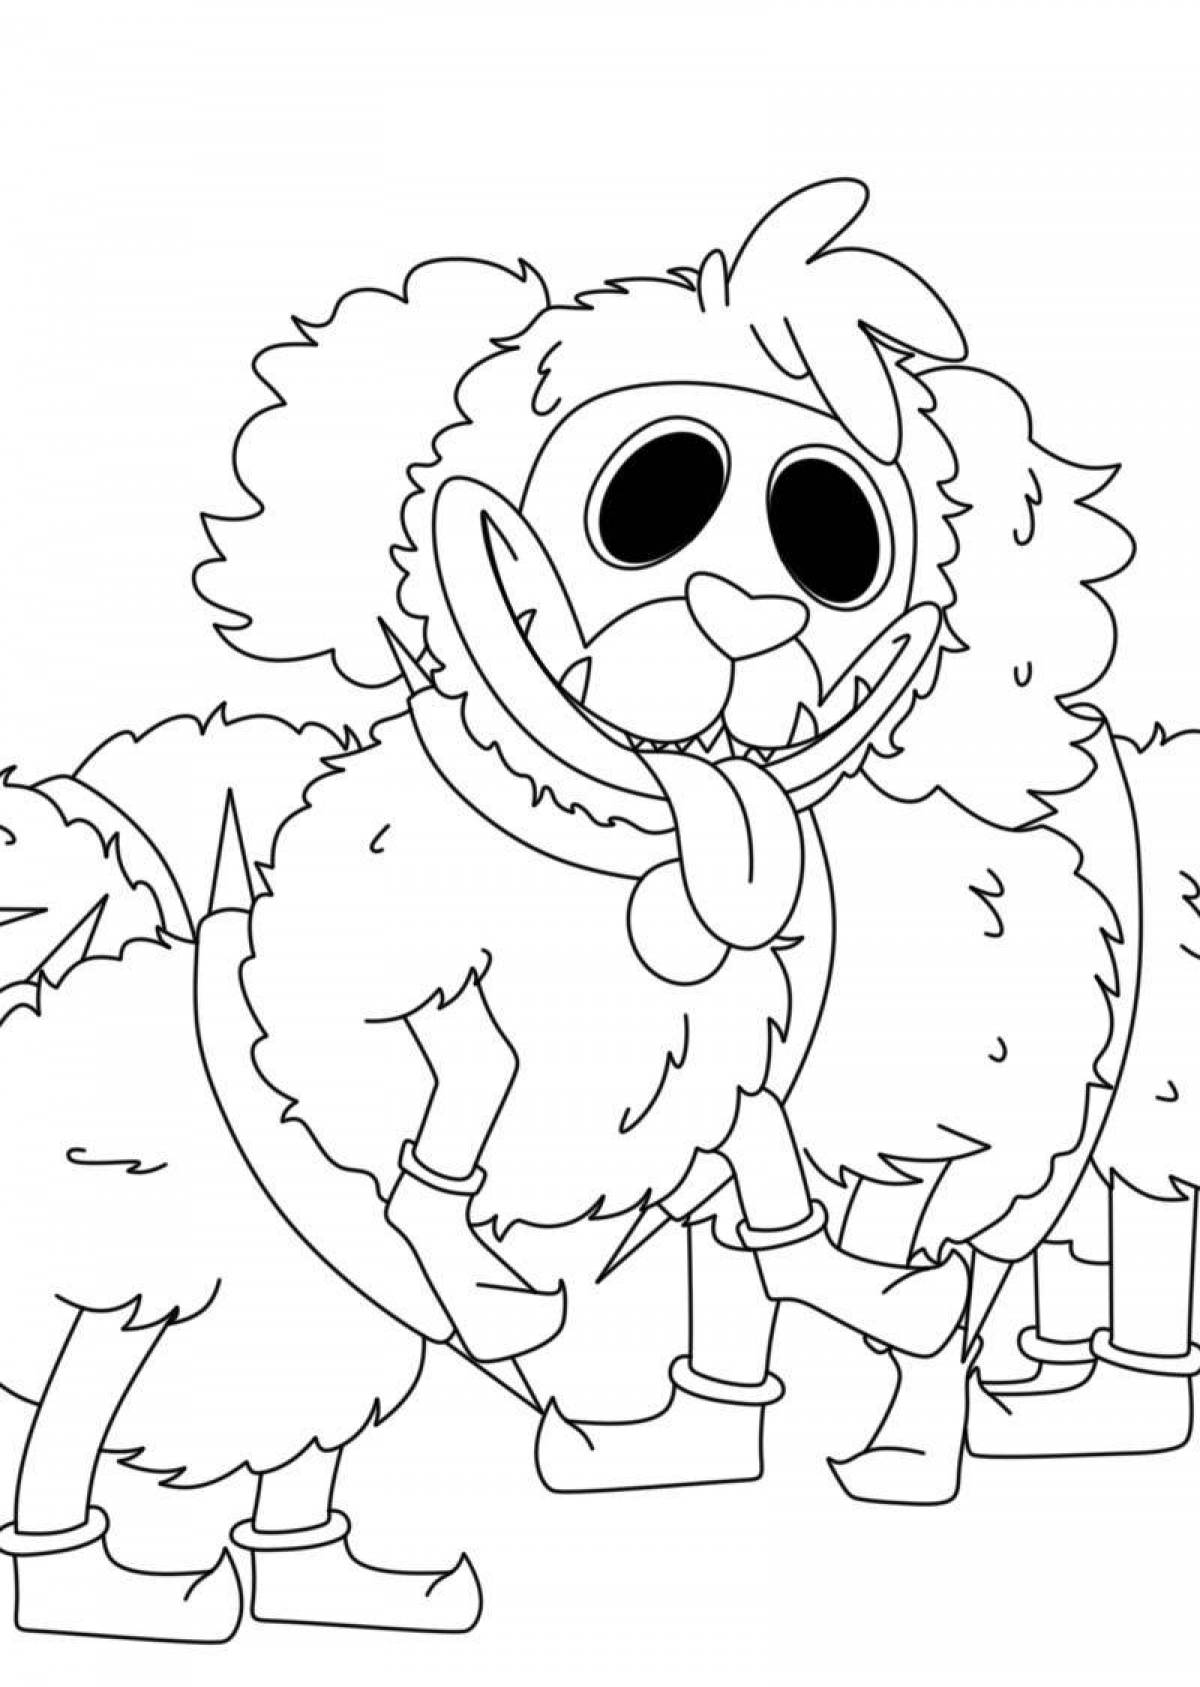 Colorful pj caterpillar coloring page